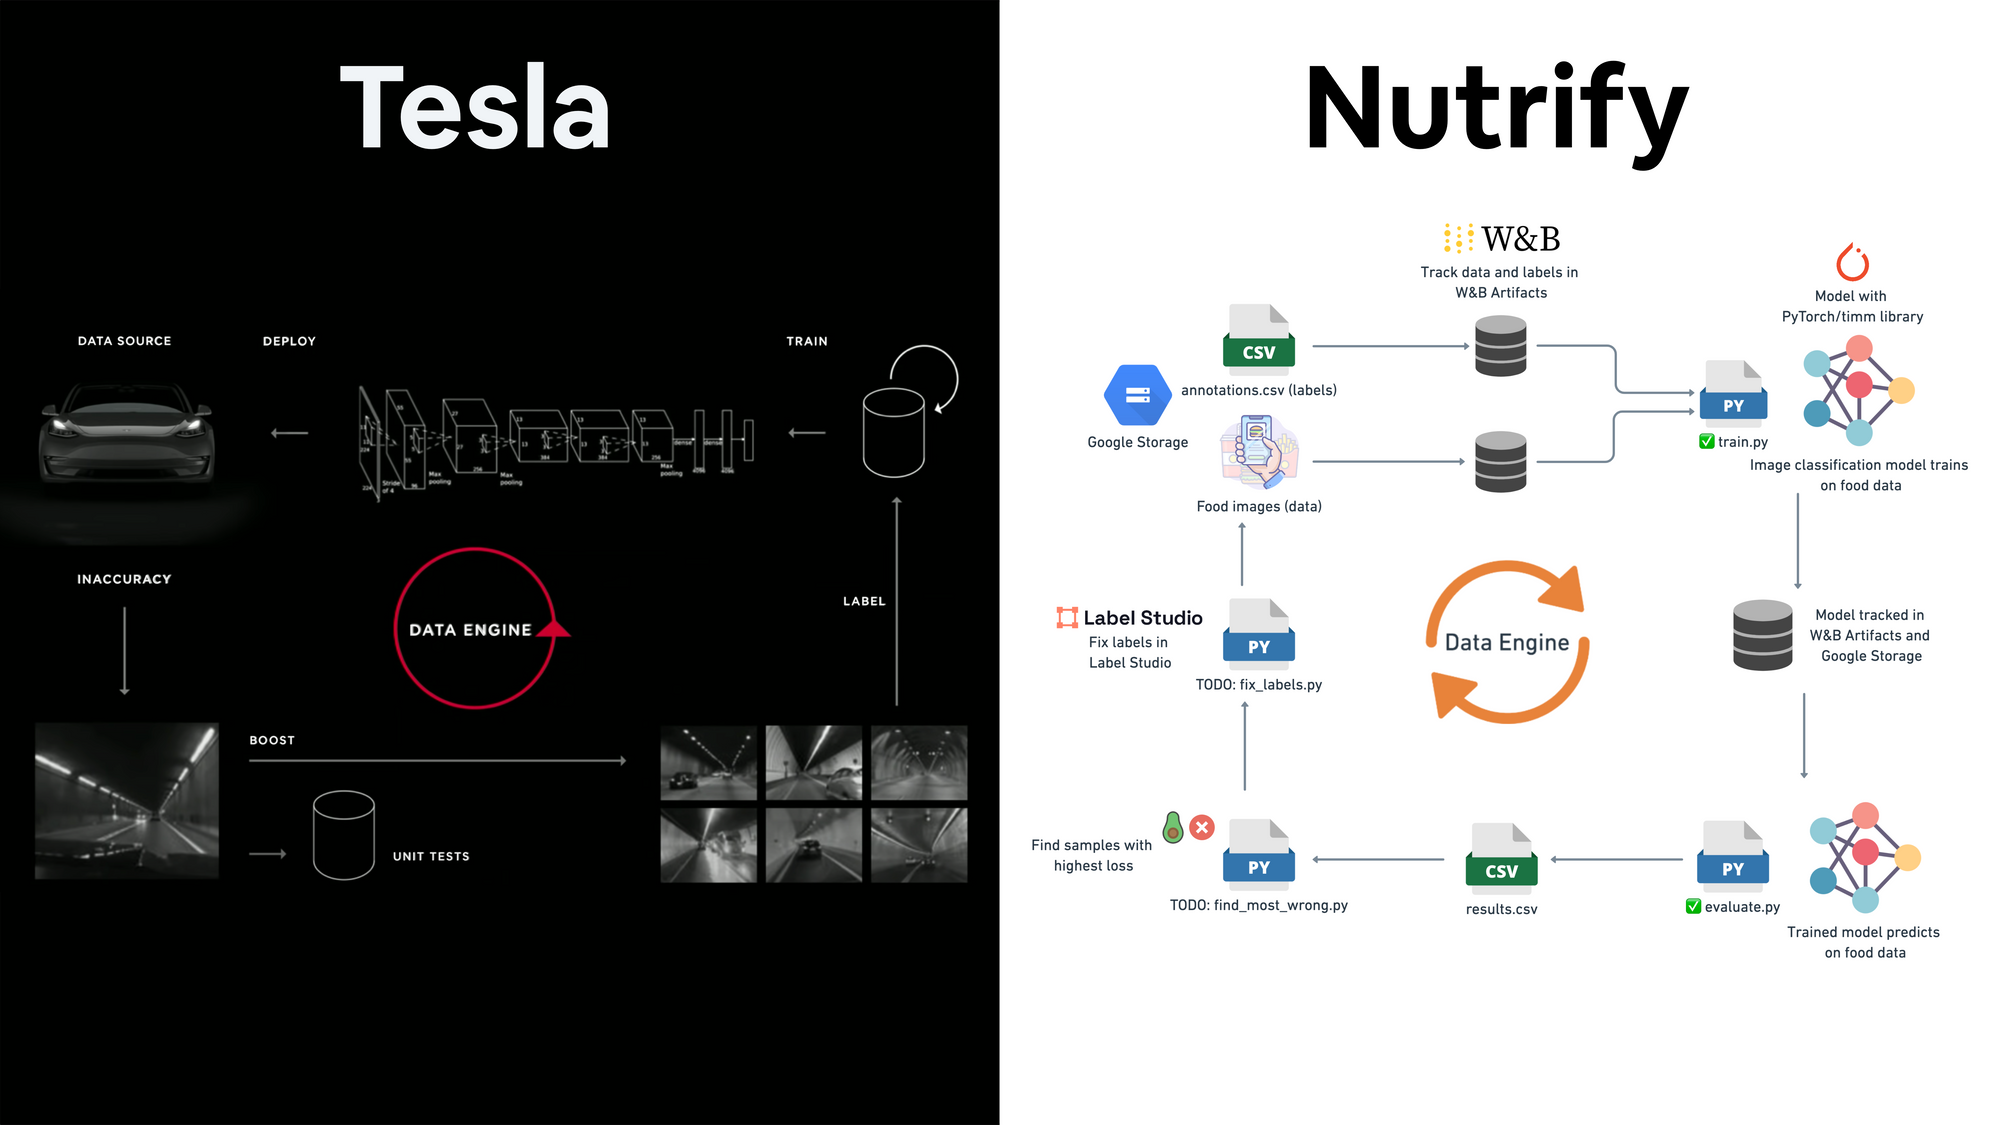 Two side by side flow charts: Tesla's data engine on the left and Nutrify's data engine on the right